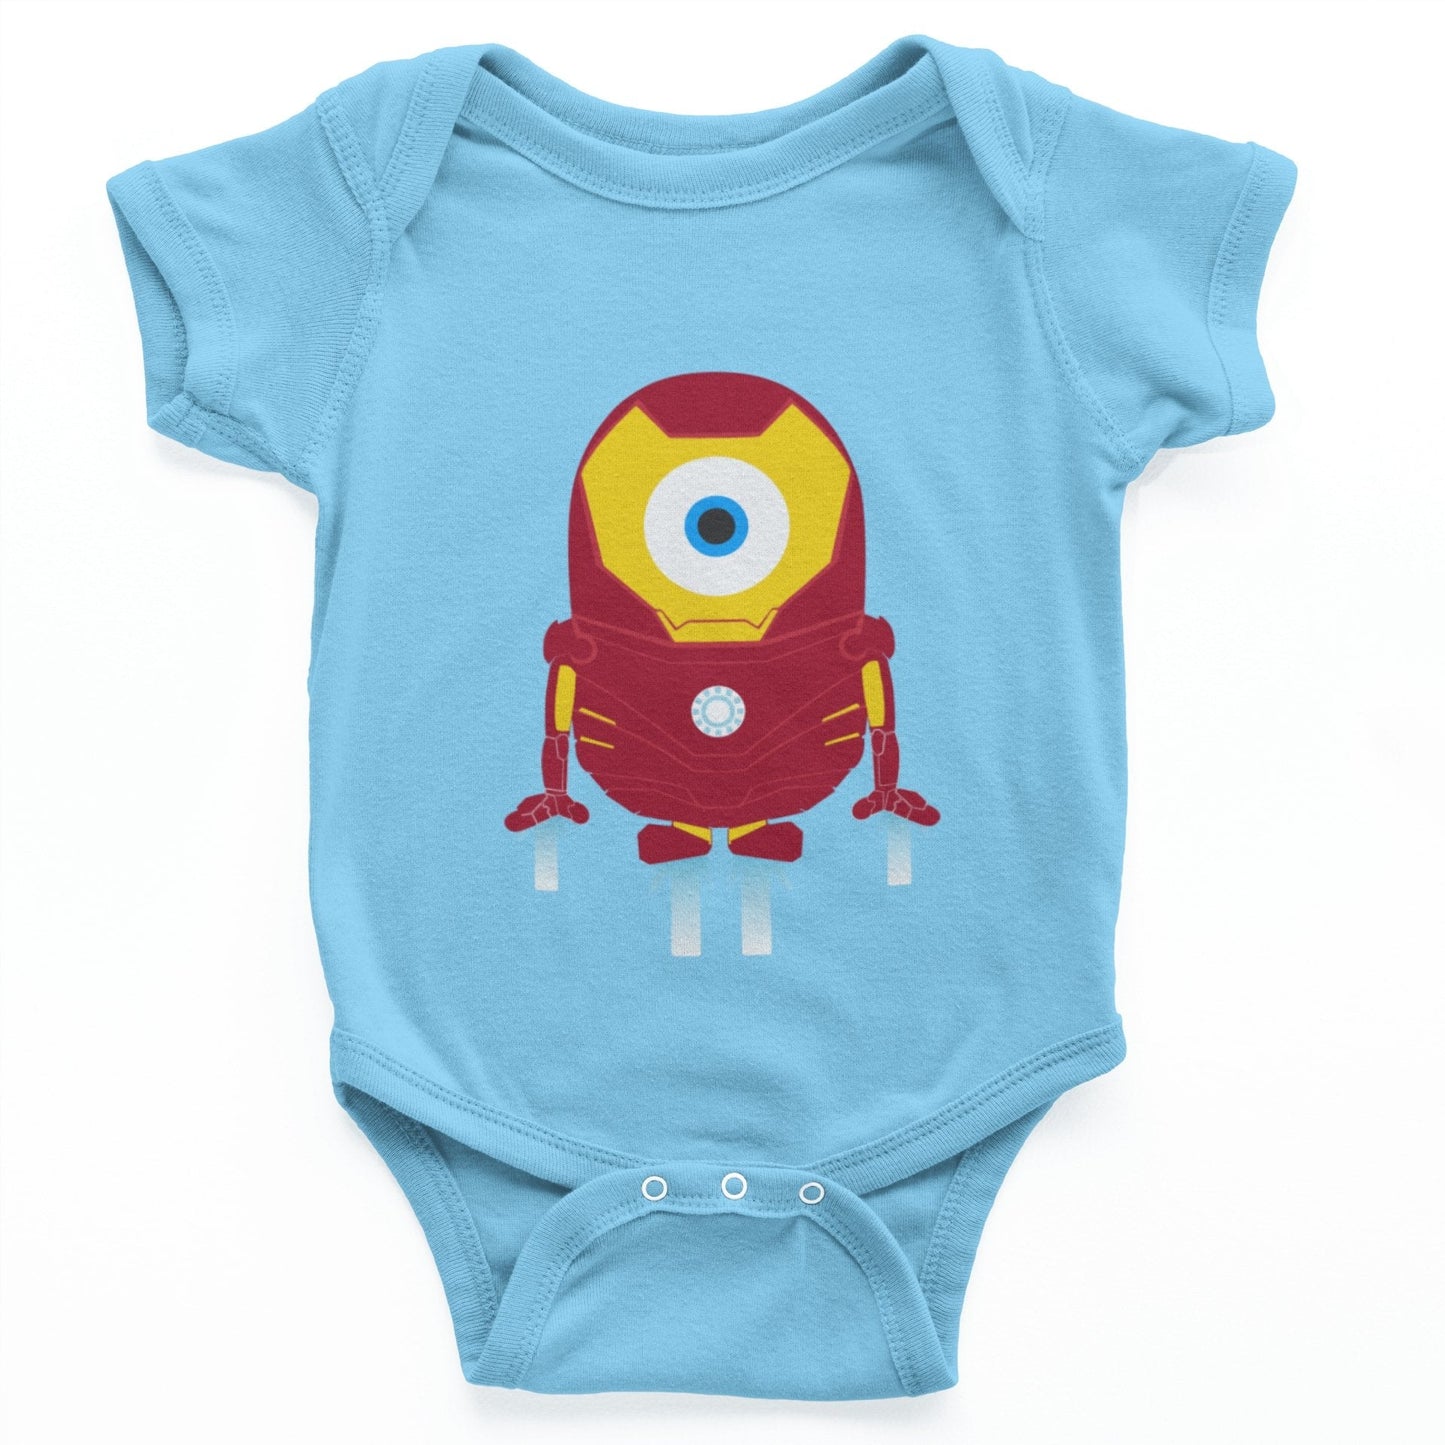 thelegalgang,Iron Man Graphic Onesies for Babies,.